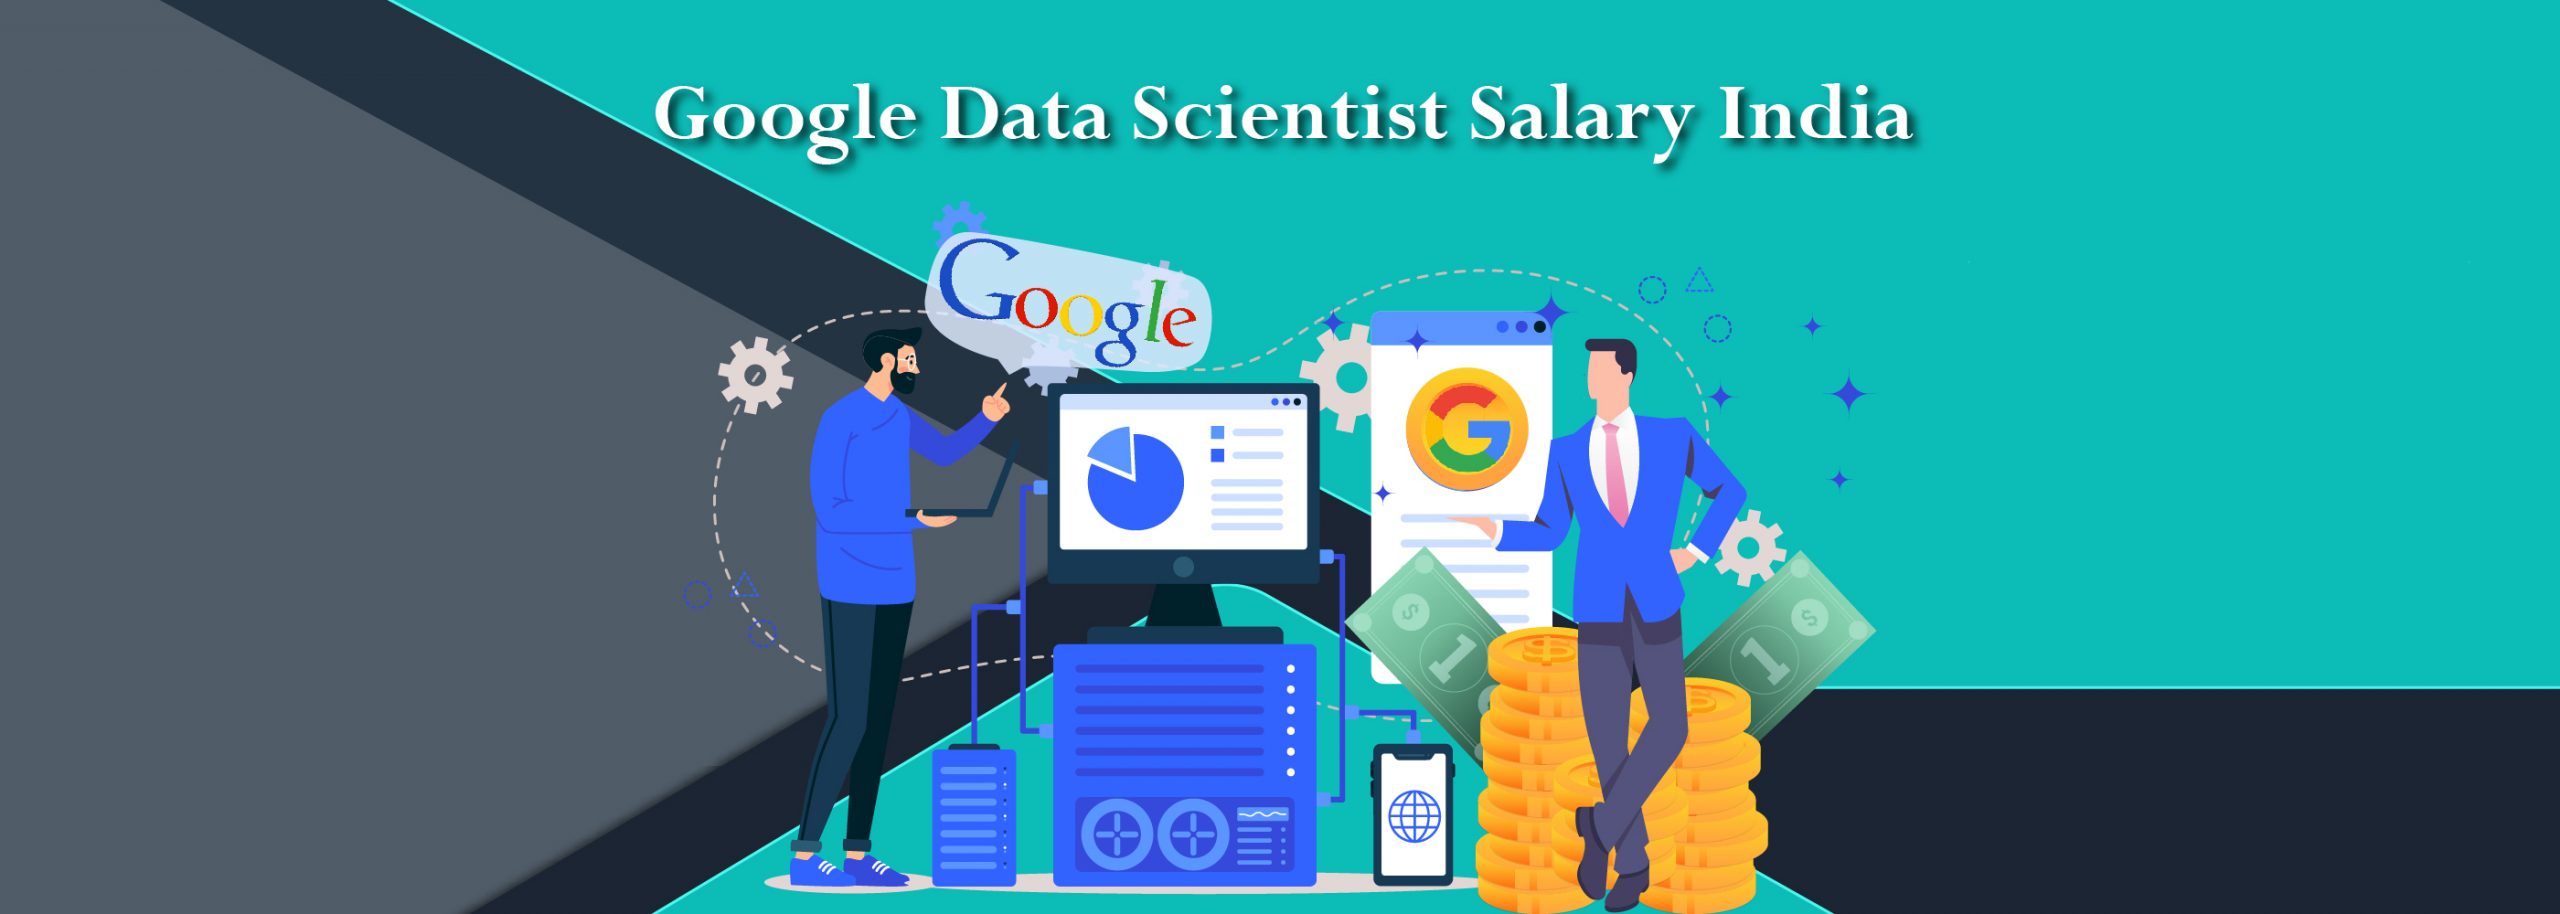 Top 4 Facts about Google Data Scientist Salary India